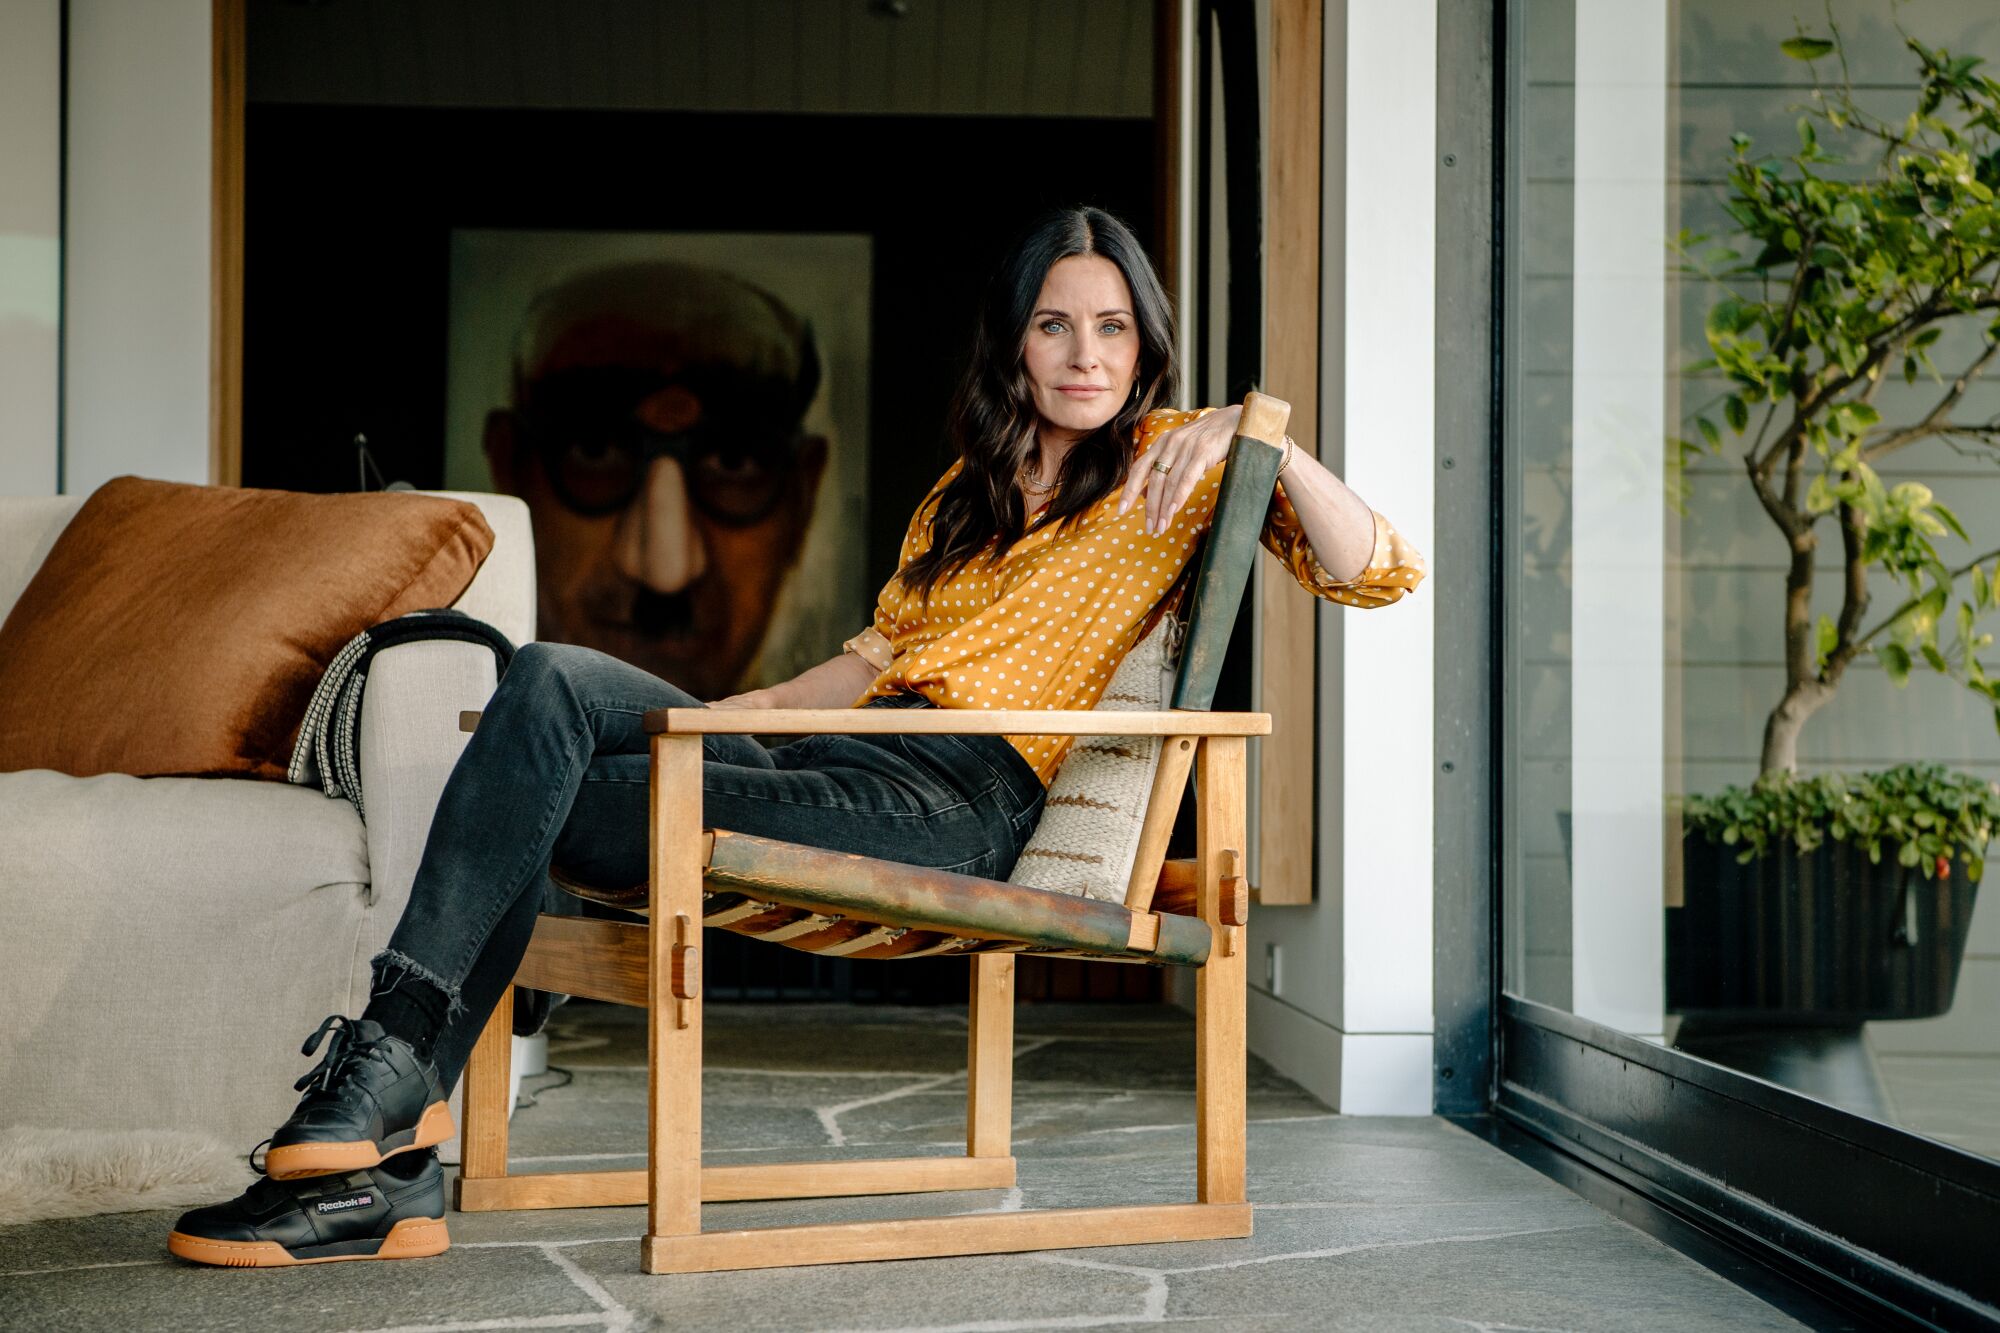 Cox poses in a chair inside her home.